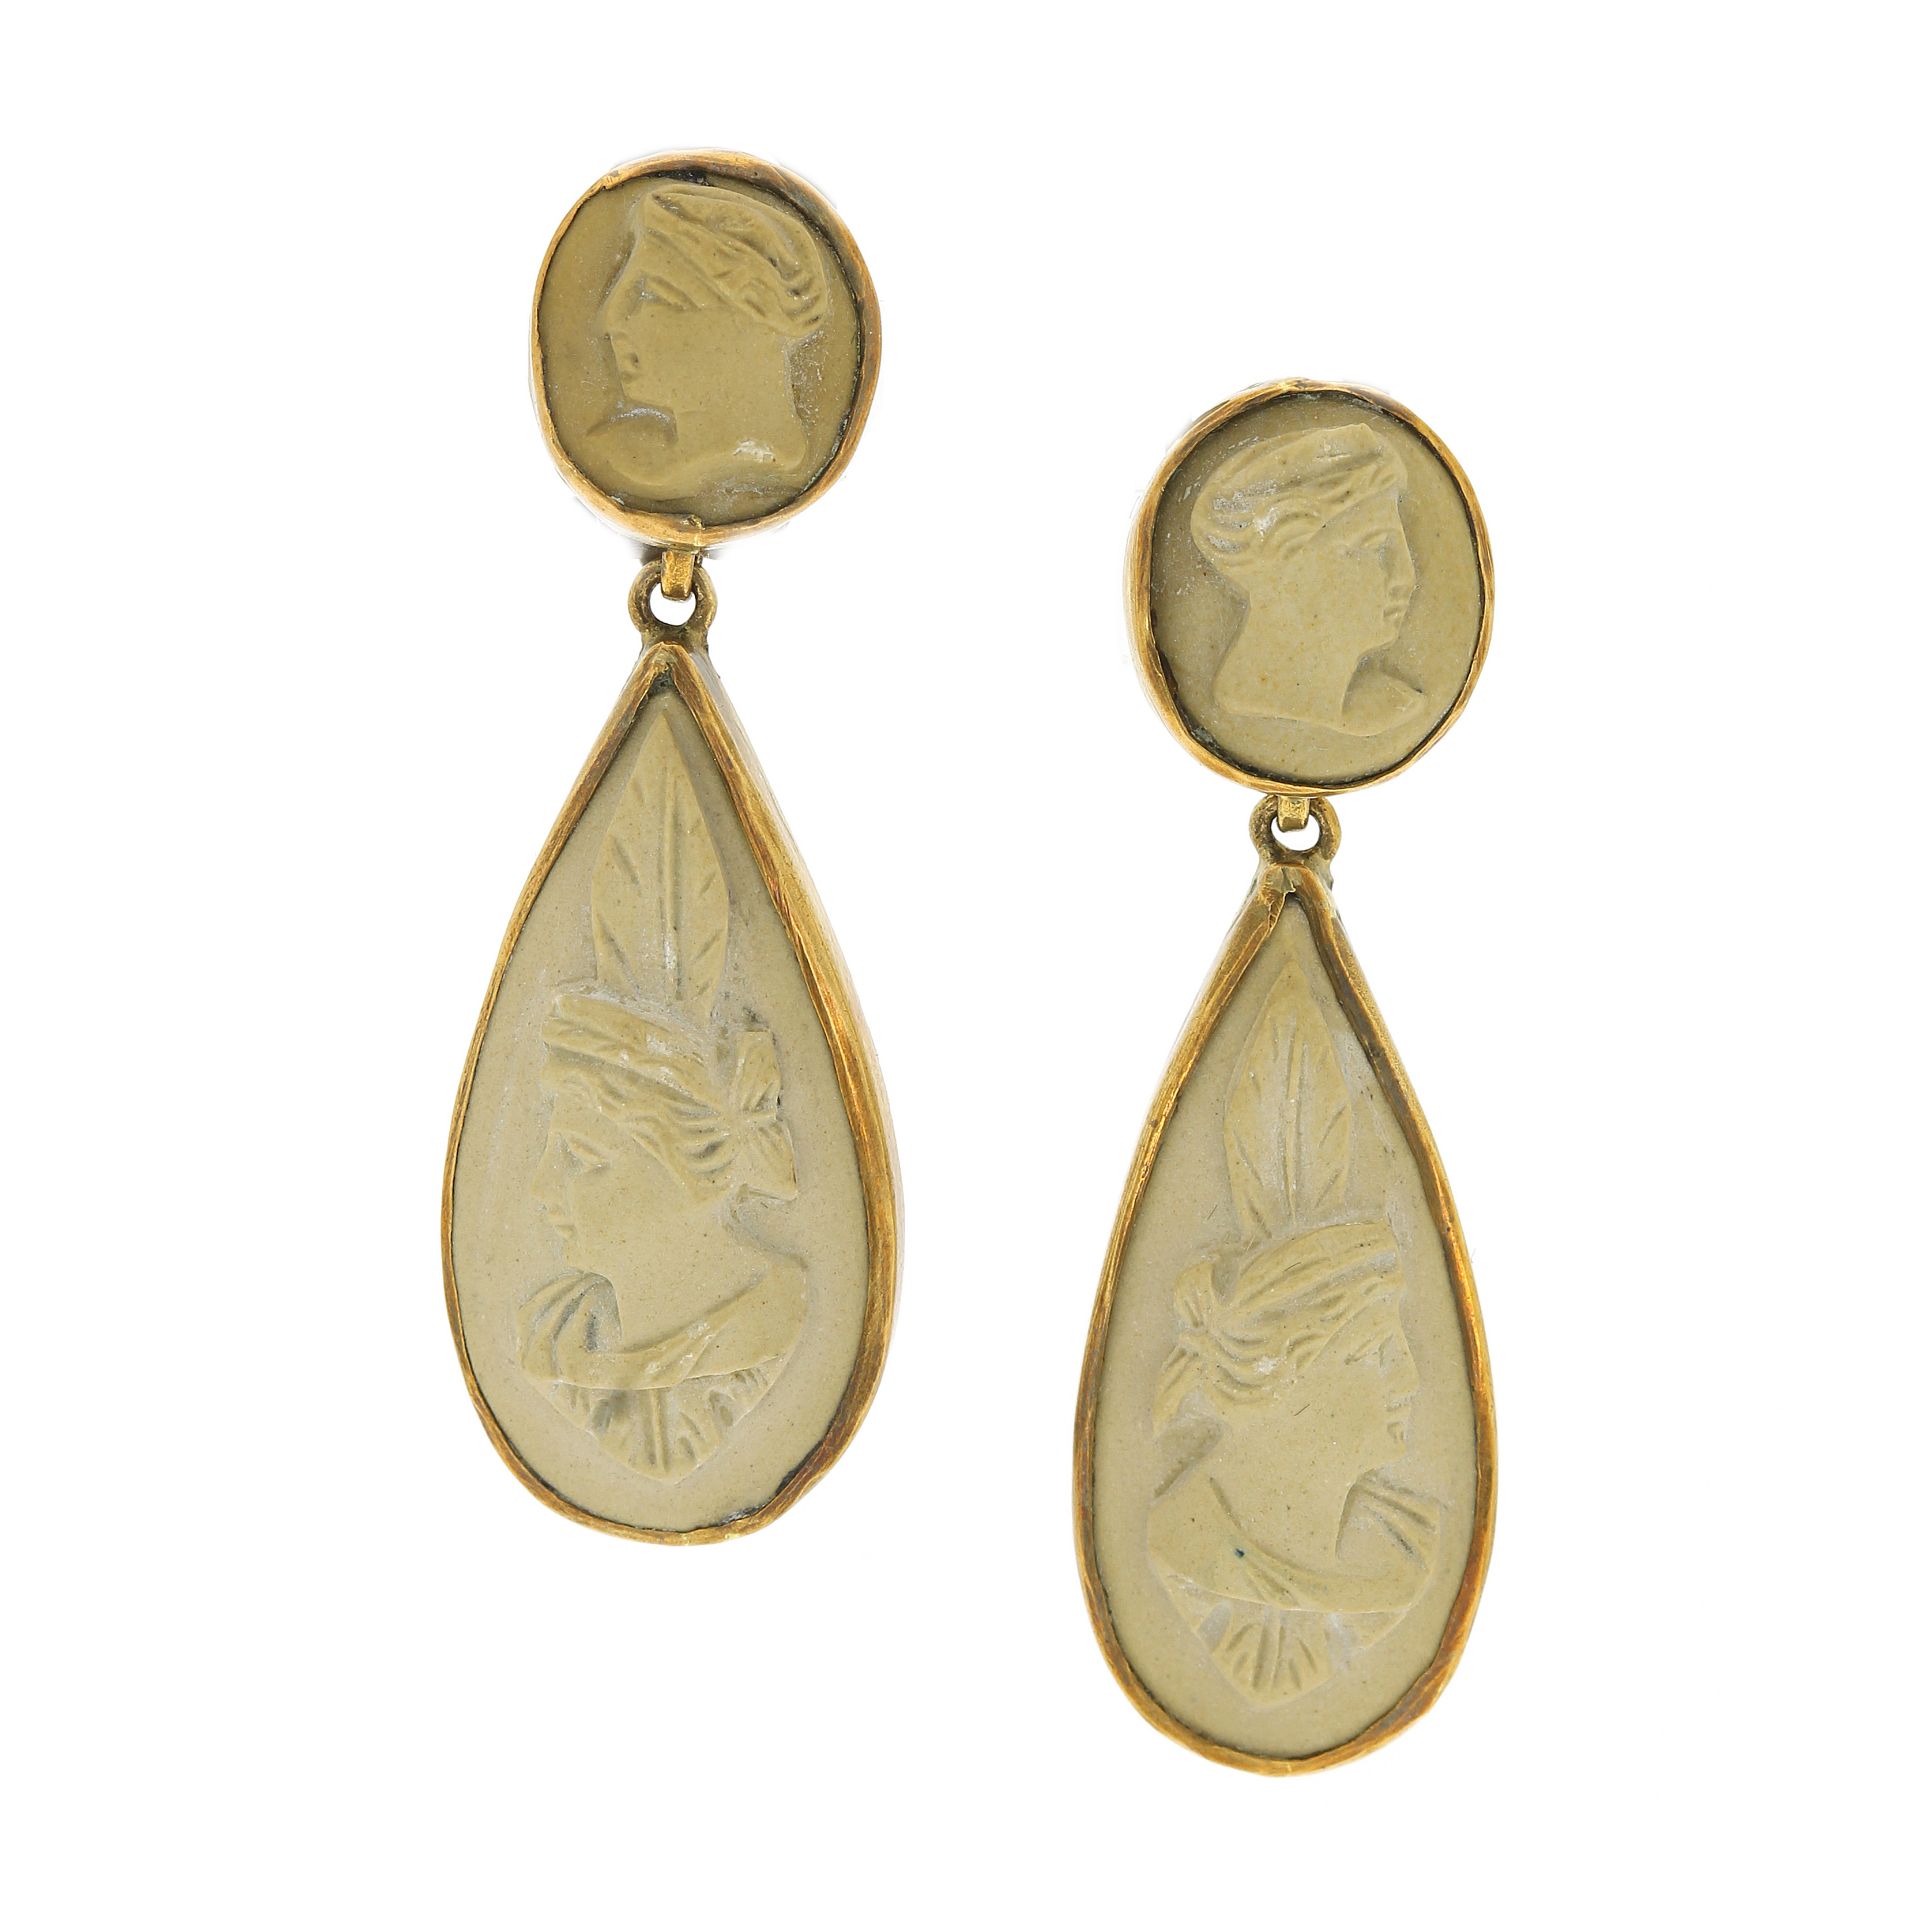 A PAIR OF ANTIQUE VOLCANIC LAVA CAMEO EARRINGS each designed as a tapering drop carved in detail